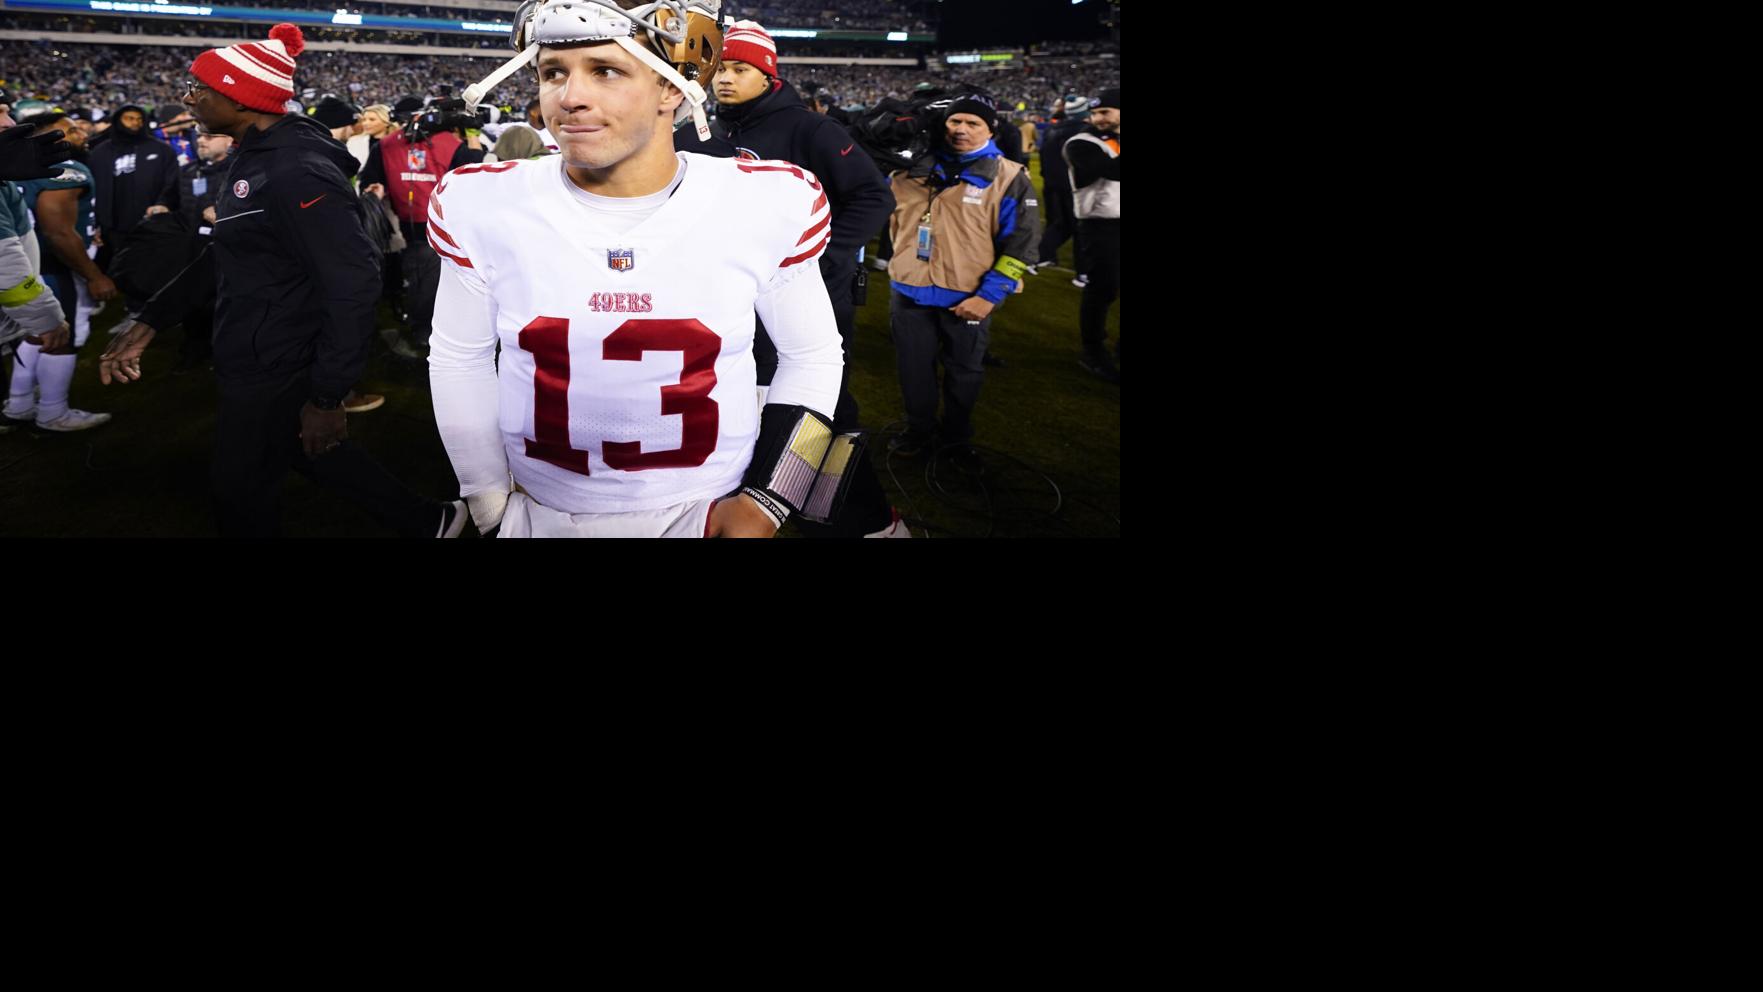 NFL OK’s emergency 3rd QB after 49ers’ injury woes in NFC title game